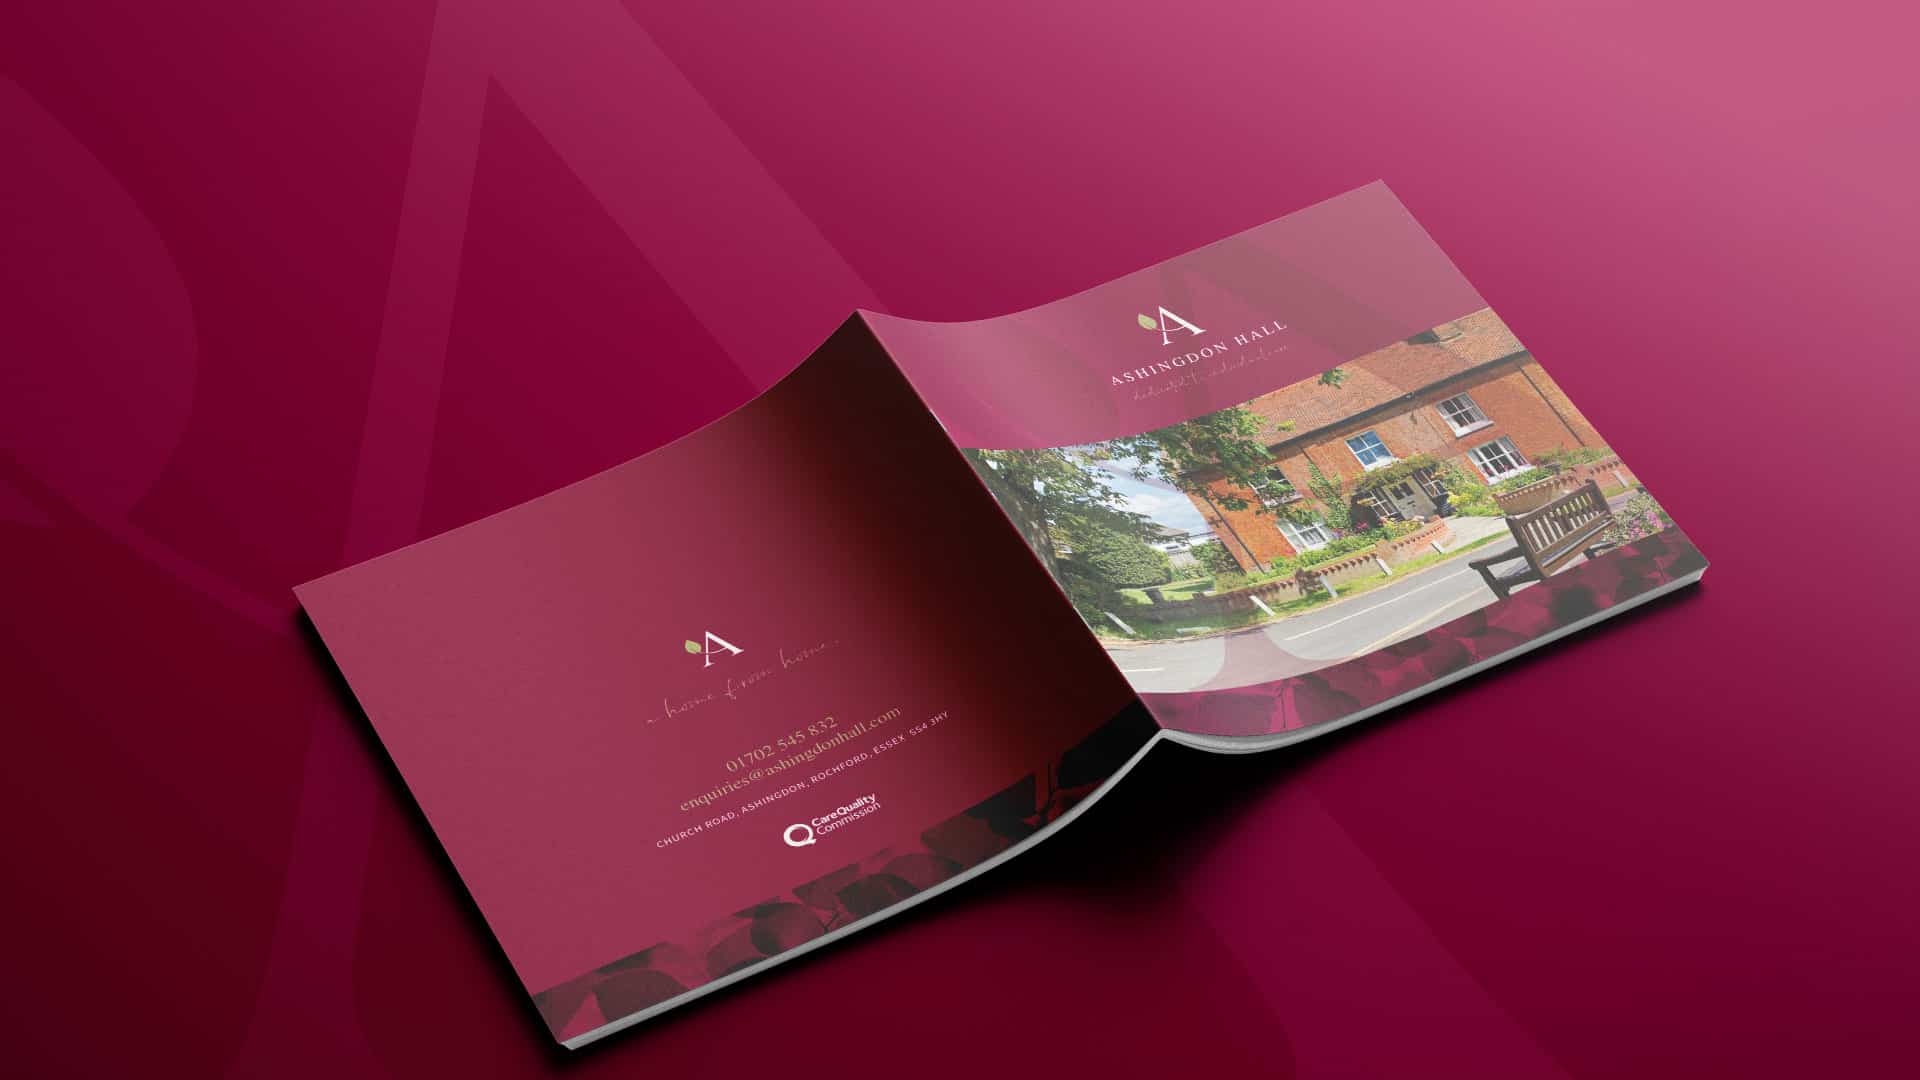 Ashingdon Hall care home, branded brochures designed by Swan Creative